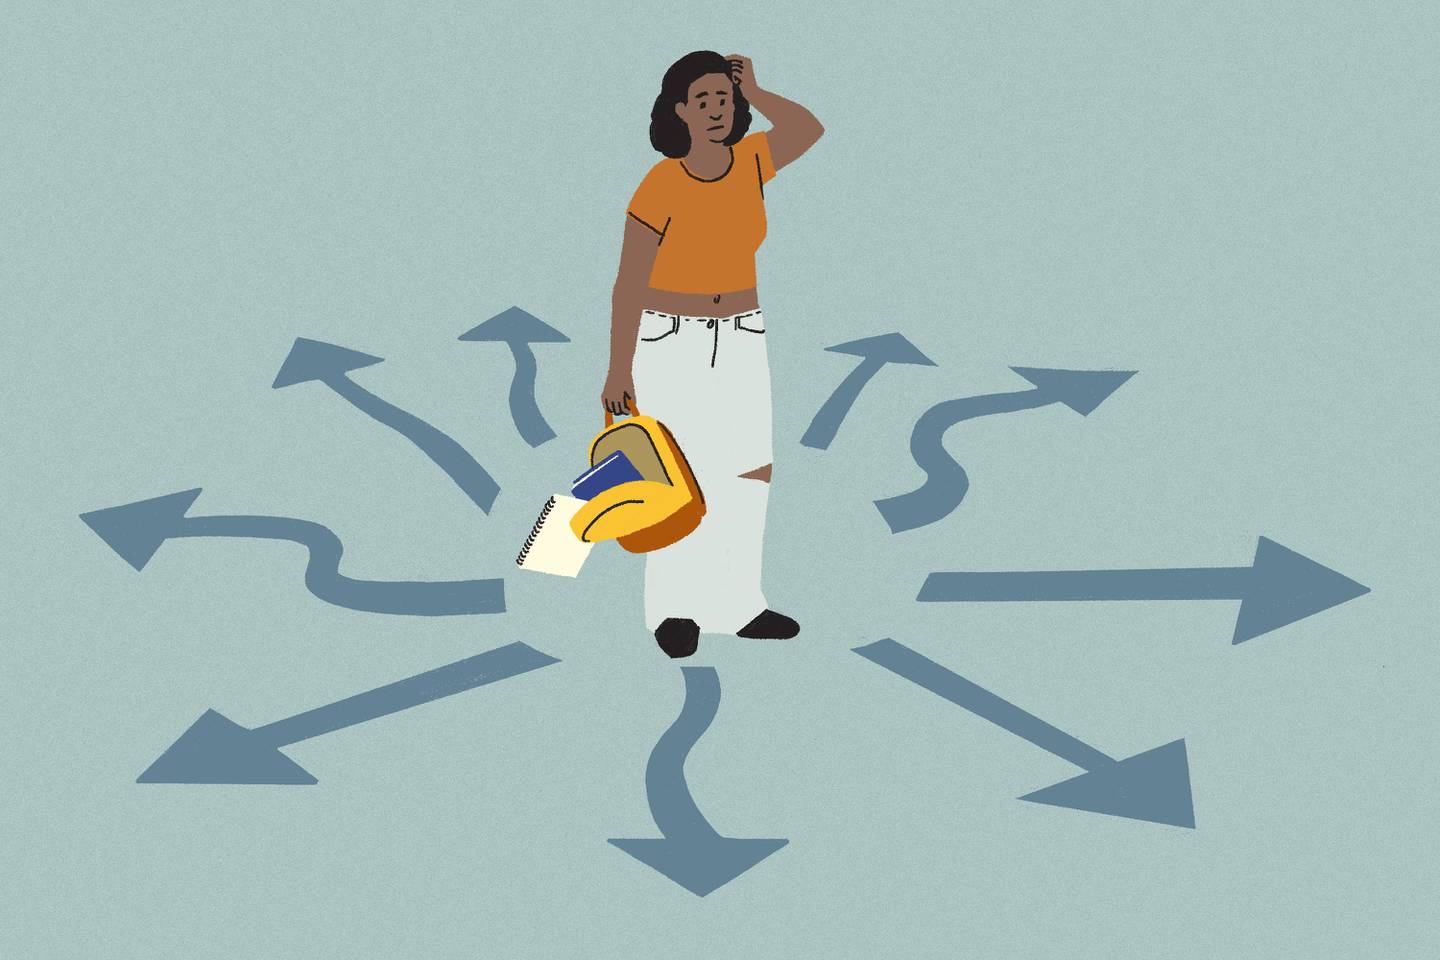 Illustration of young woman holding backpack and scratching her head, with arrows radiating in all directions out from her feet.